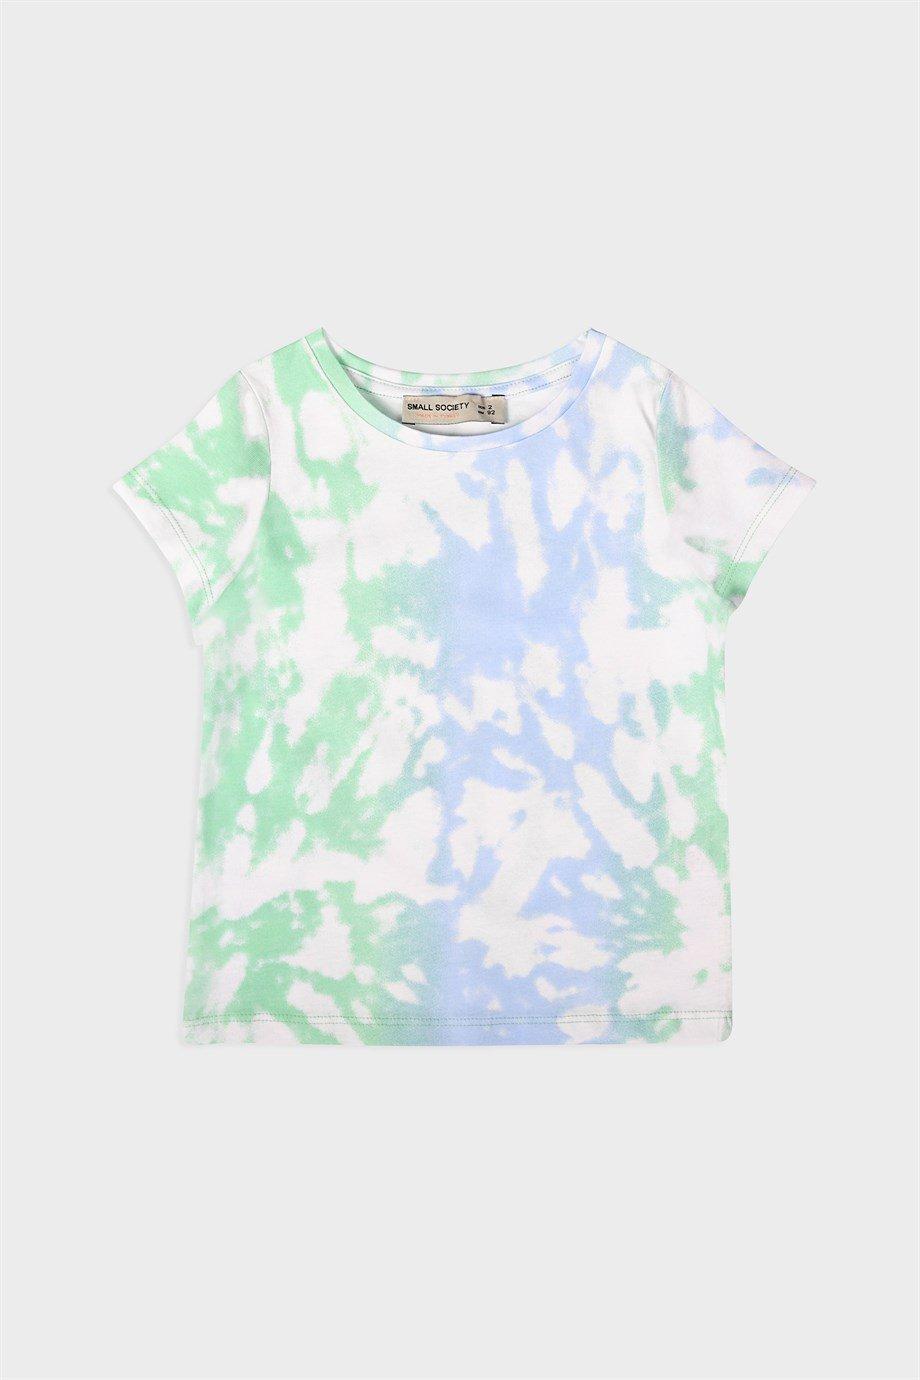 Small Society Tie Dye Printed T-Shirt for Girl